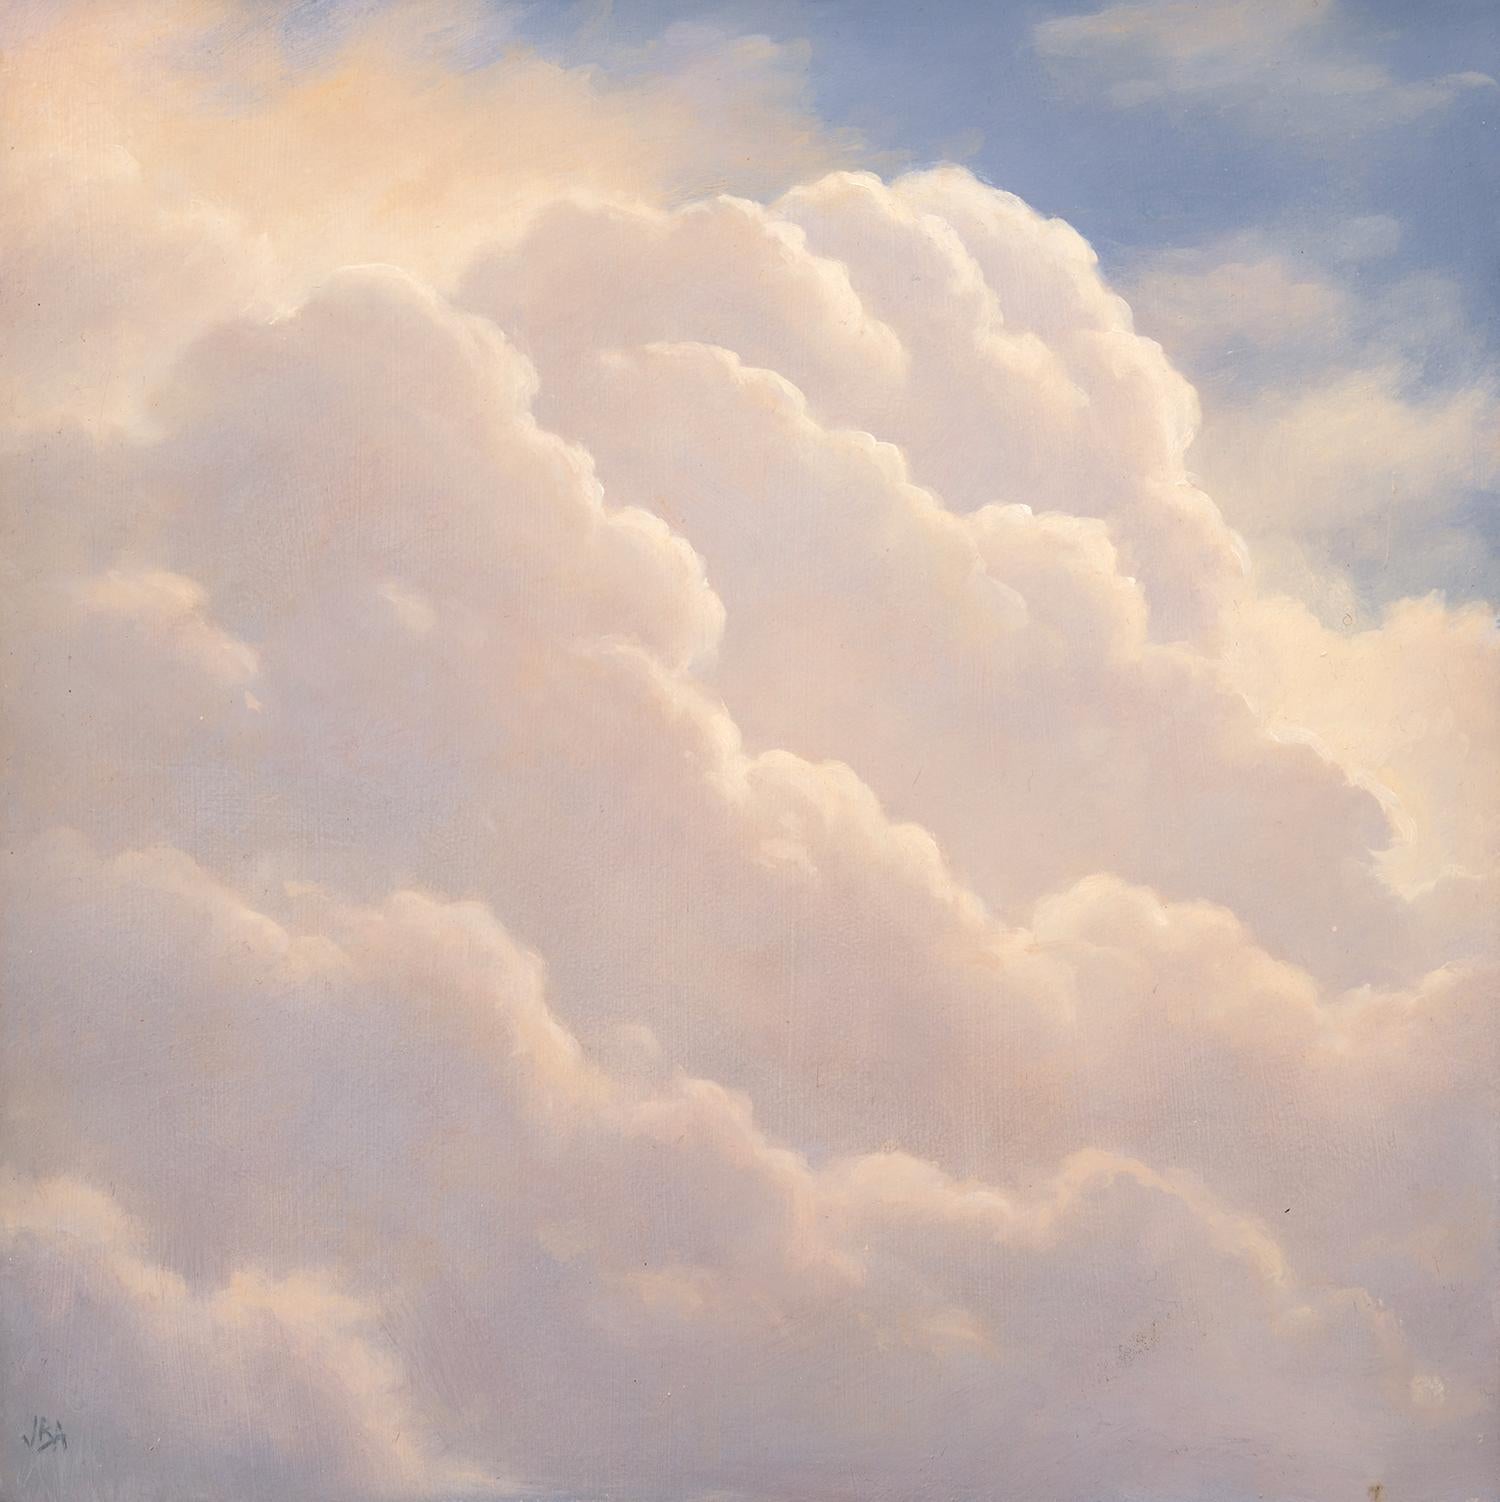 Modern Luminist, Hudson River School landscape painting of white billowing clouds
"Cloud Icon XXIV" by Jane Bloodgood-Abrams, painted in 2023
12 x 12 inches, oil on panel, 13.75 x 13.75 x 1 inches framed
Small, Square landscape painting in black